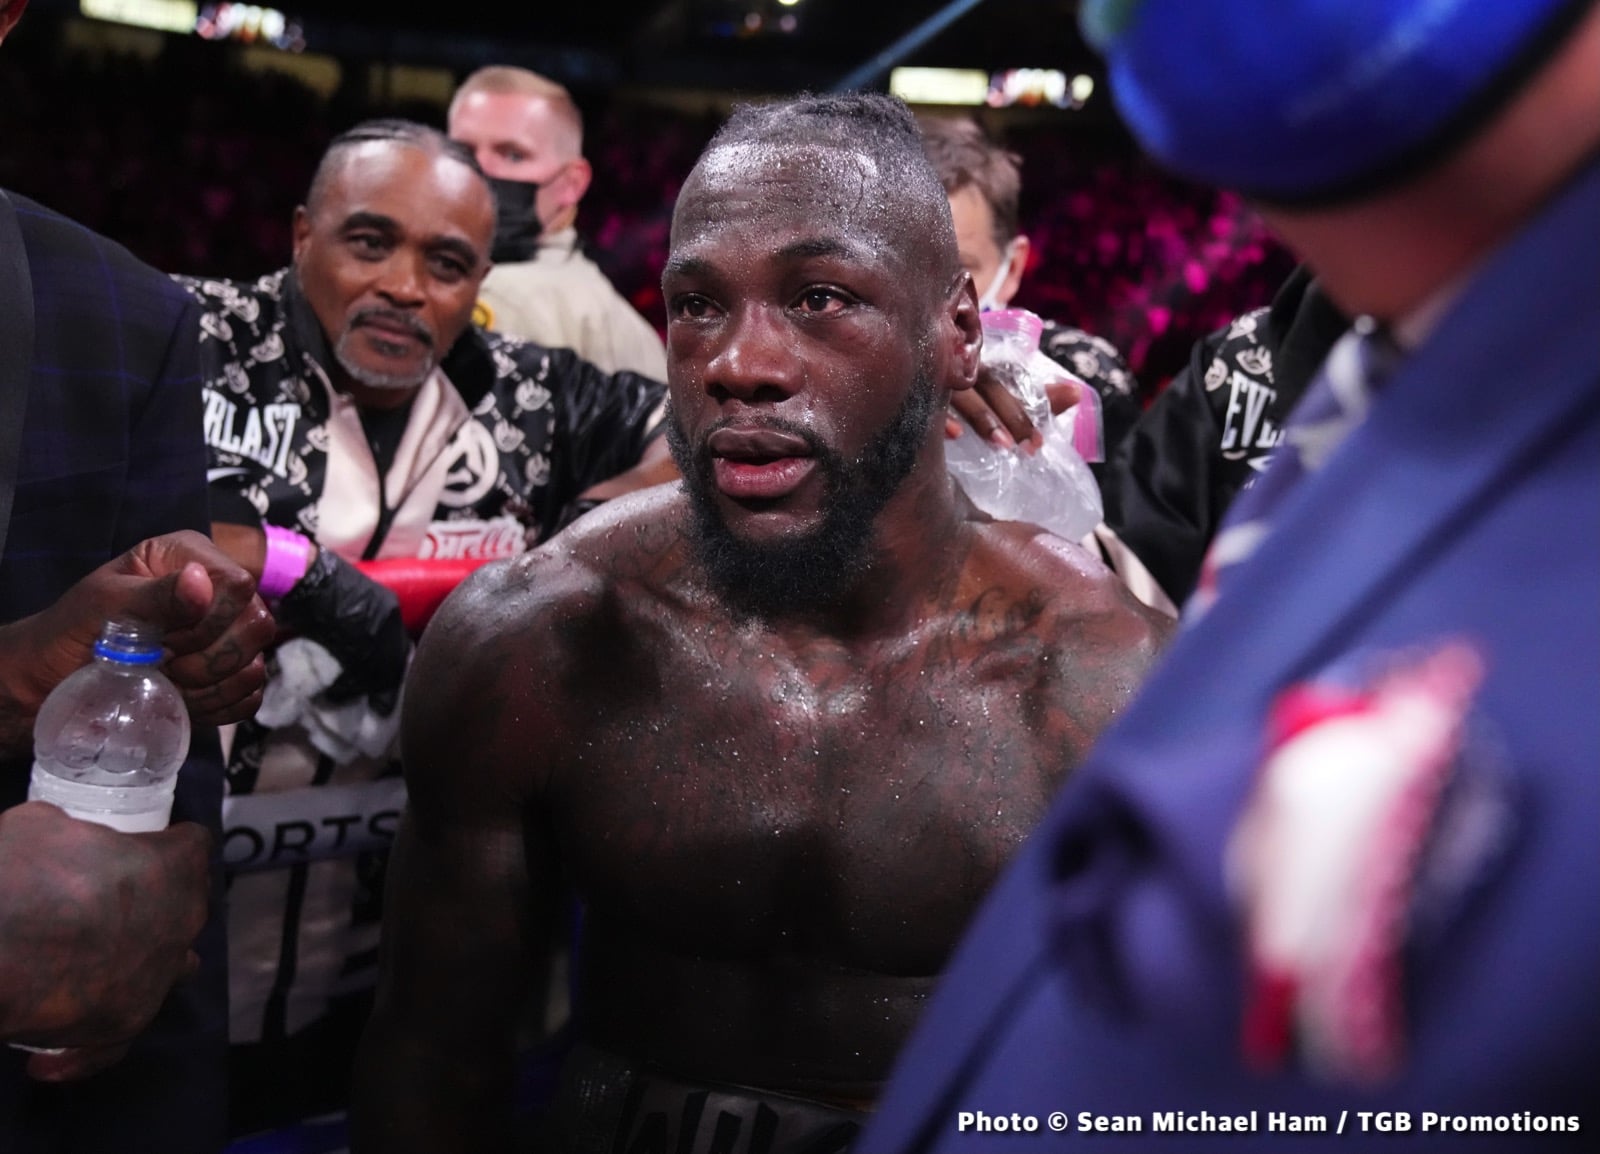 Will Deontay Wilder Fight Again? Will Ayahuasca Really Help Him Make Up His Mind!